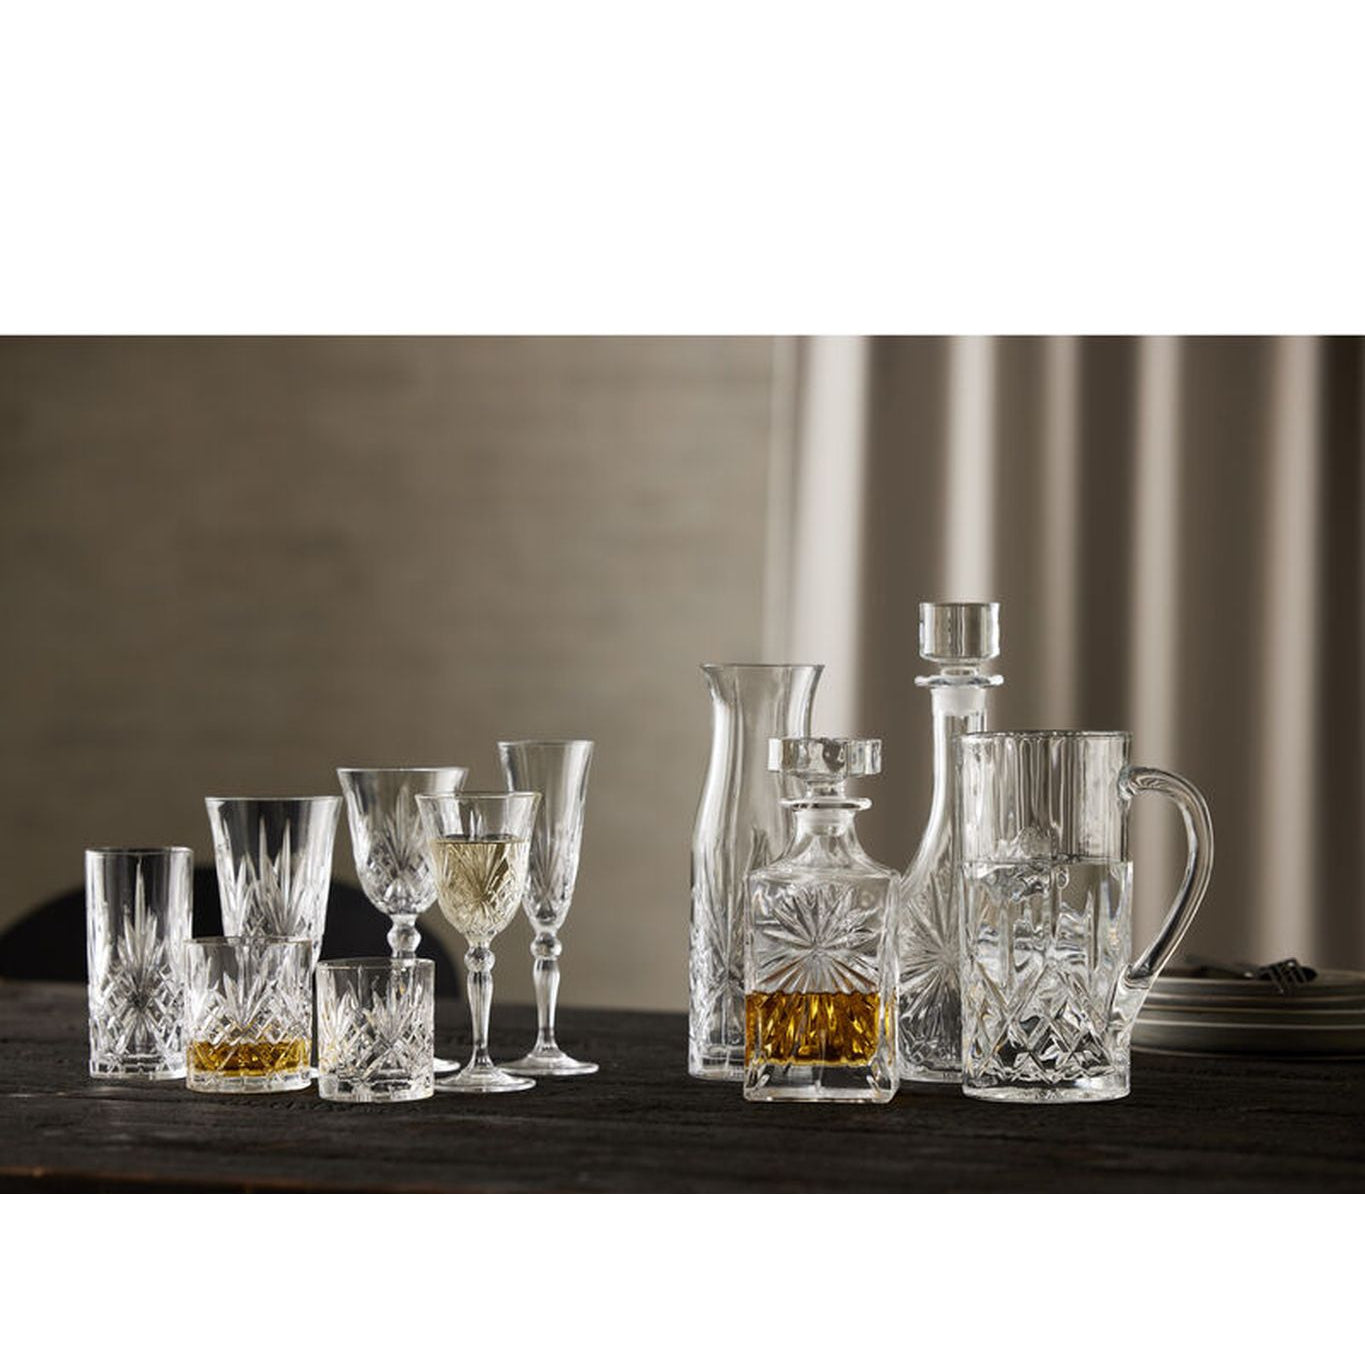 Lyngby Glas Melodia Crystal Highball Drinks Glass 6 Cl, 6 st.